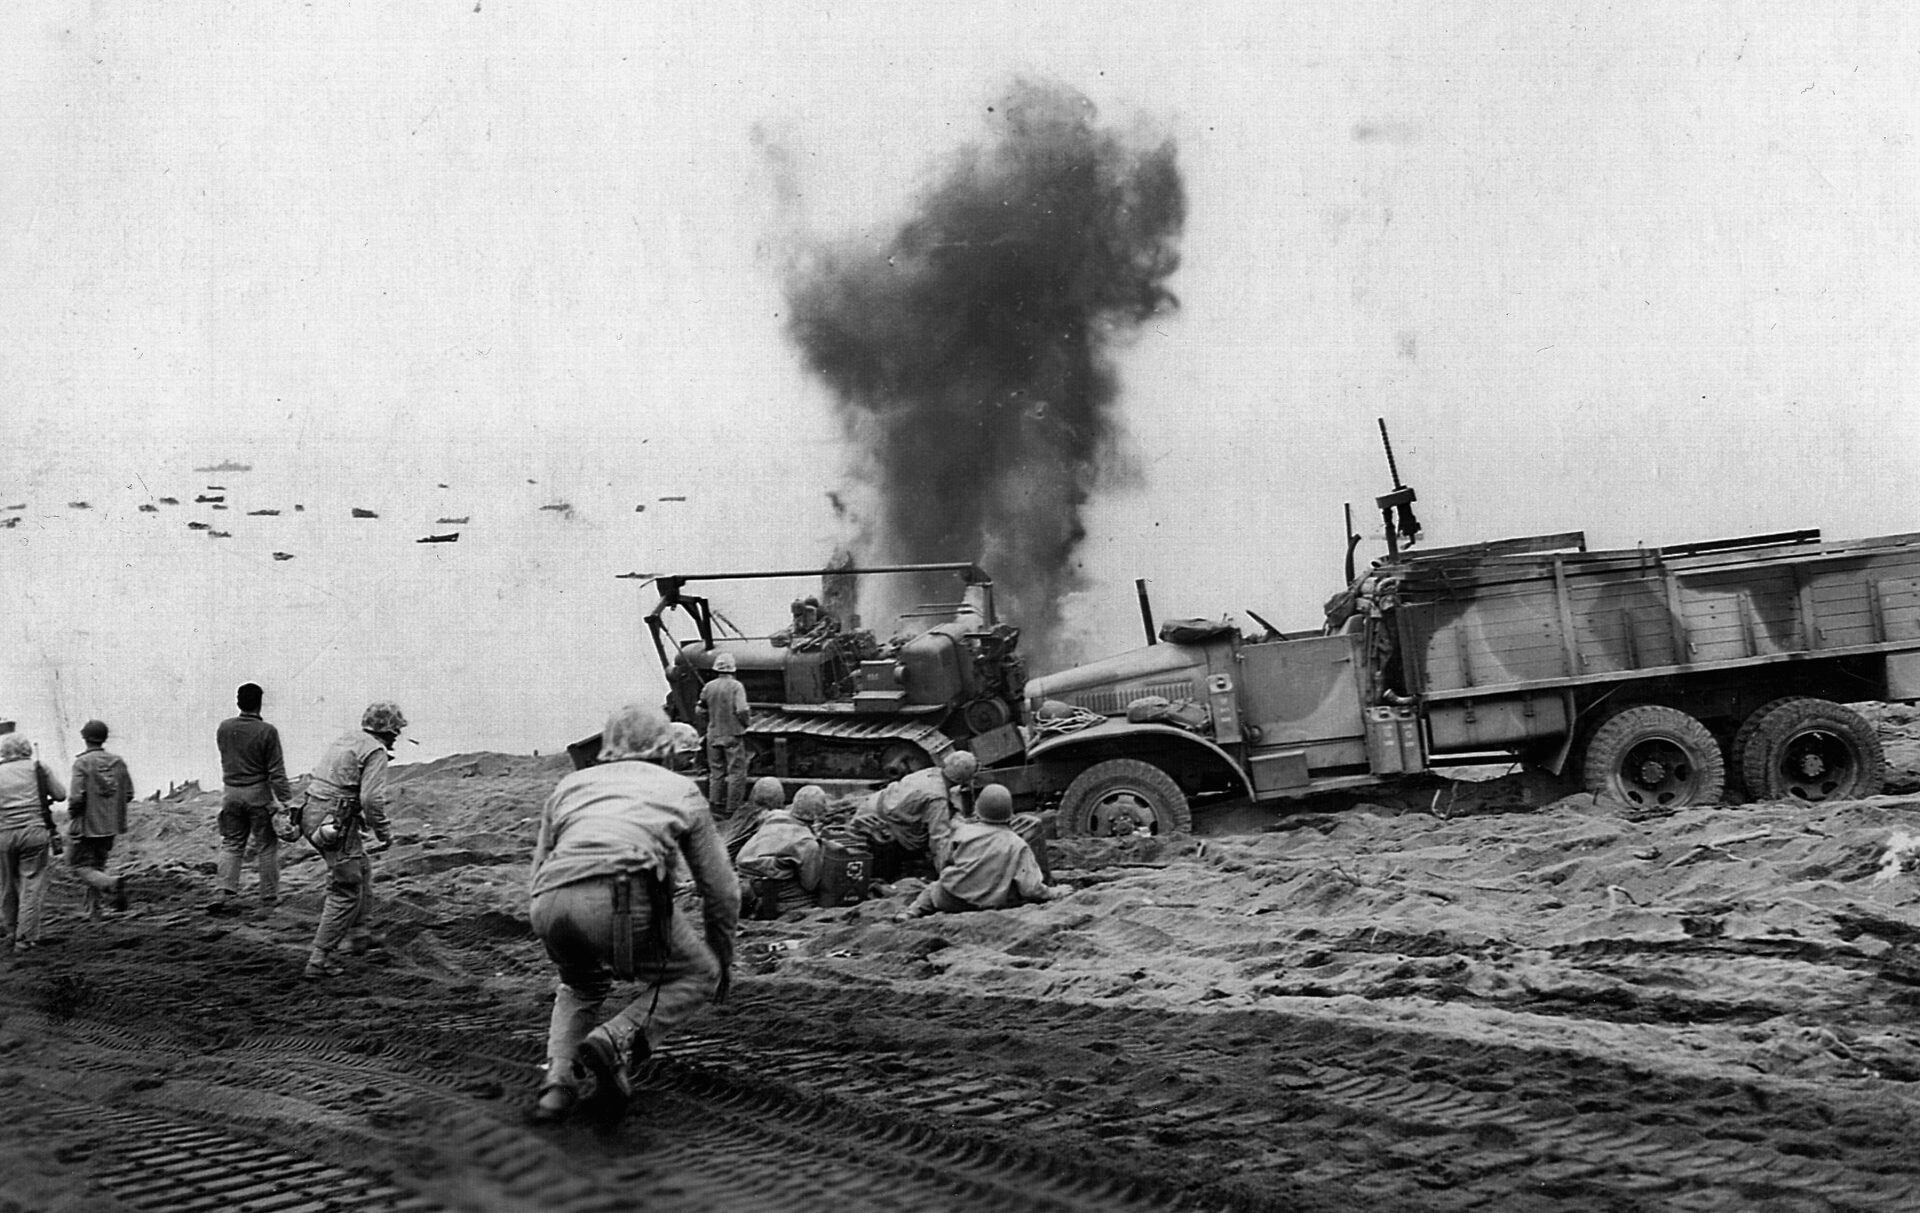 Smoke and debris fill the air behind a demolition squad as they comb the beach for Japanese booby traps. 